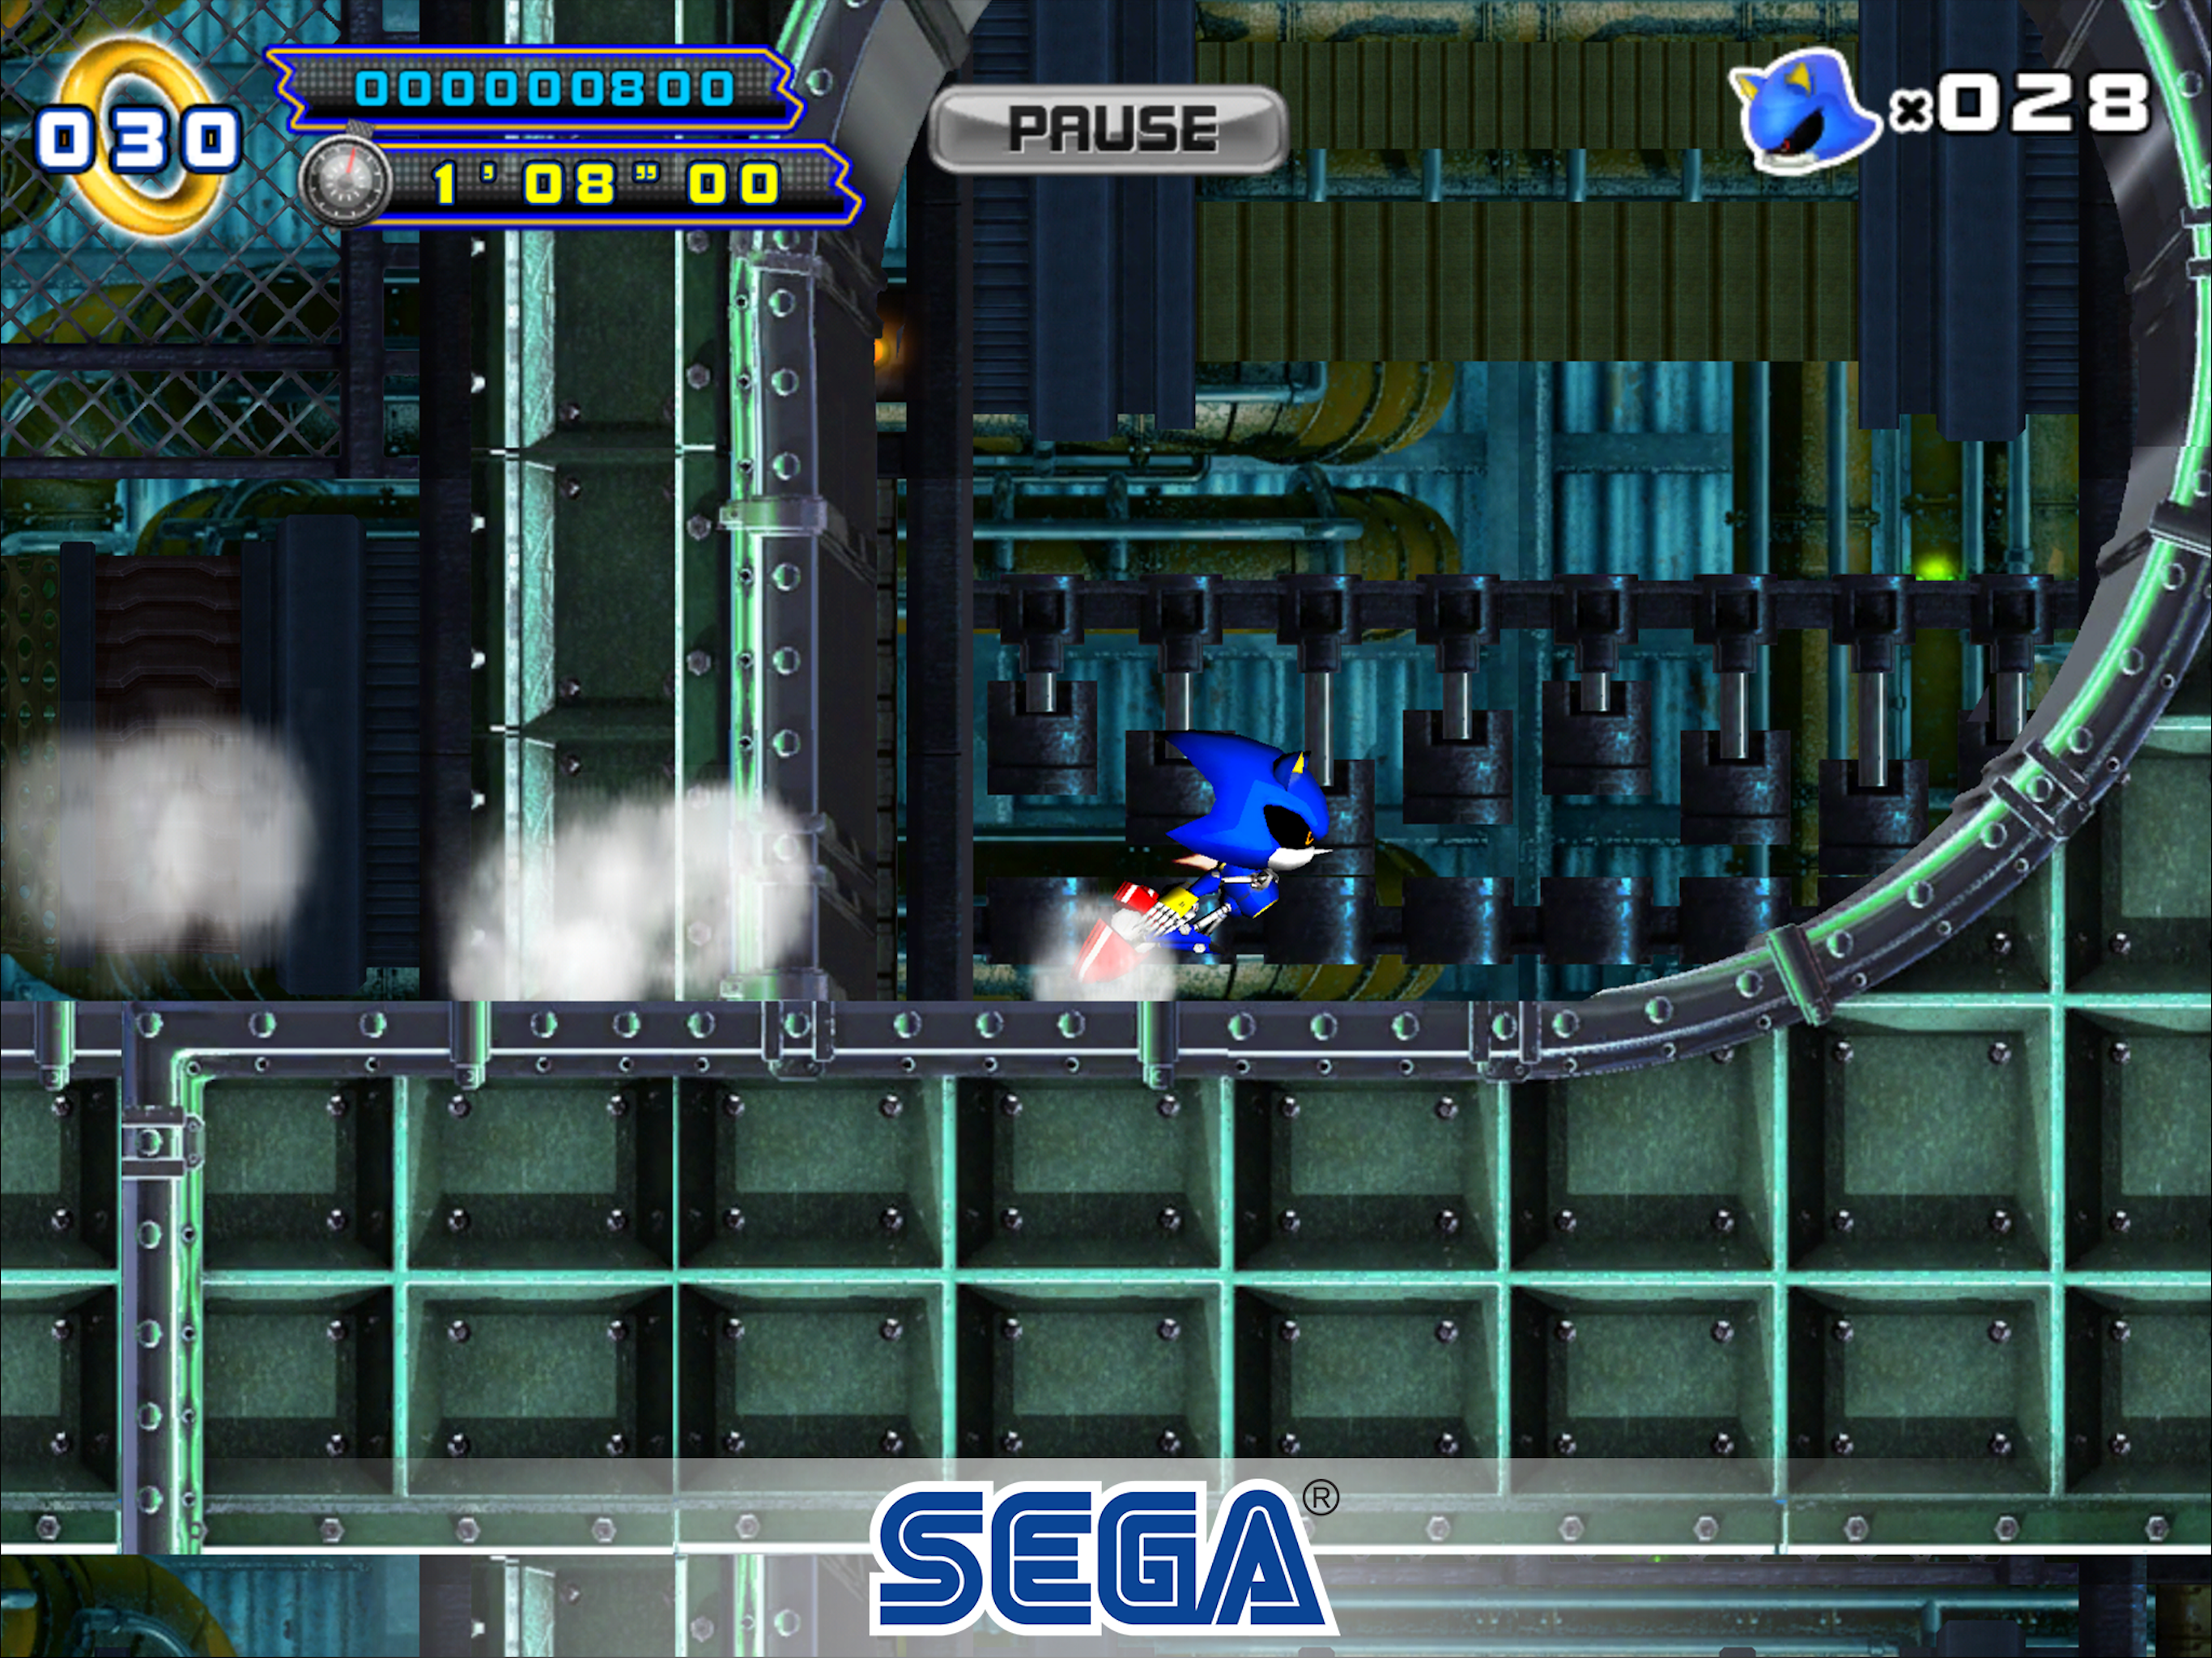 How to Download Sonic The Hedgehog 4 Ep. II for Android